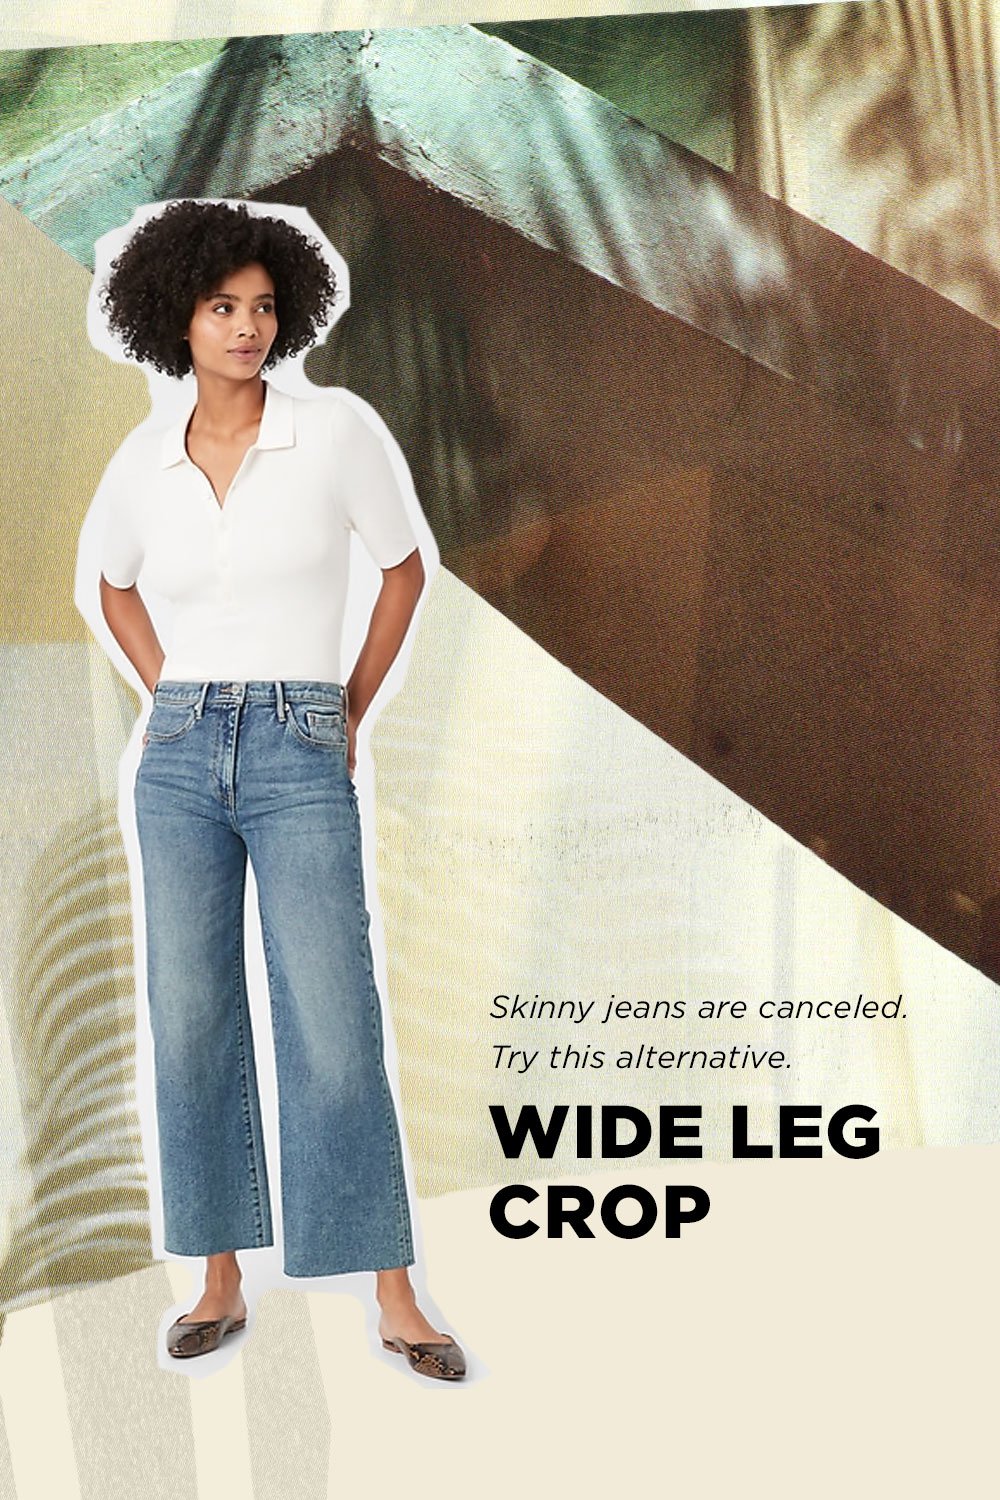 Skinny Jeans are Out of Style - 9 Alternatives to skinny jeans